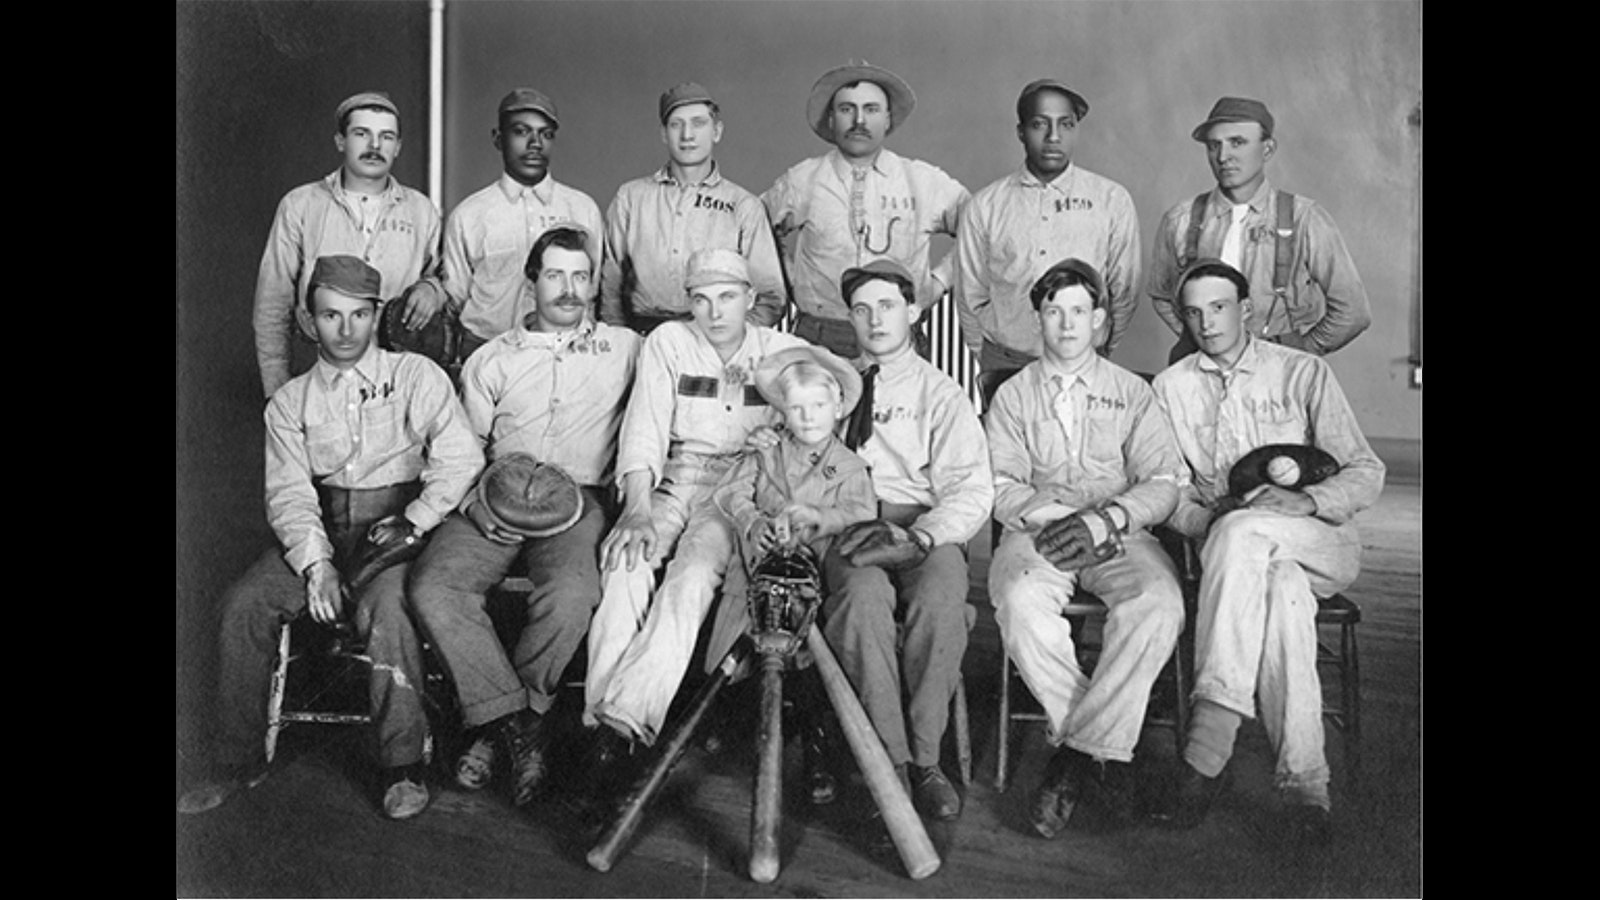 Team photo of the original Wyoming State Prison All-Stars prior to getting uniforms. The kid in the middle is the warden's 4-year-old son.